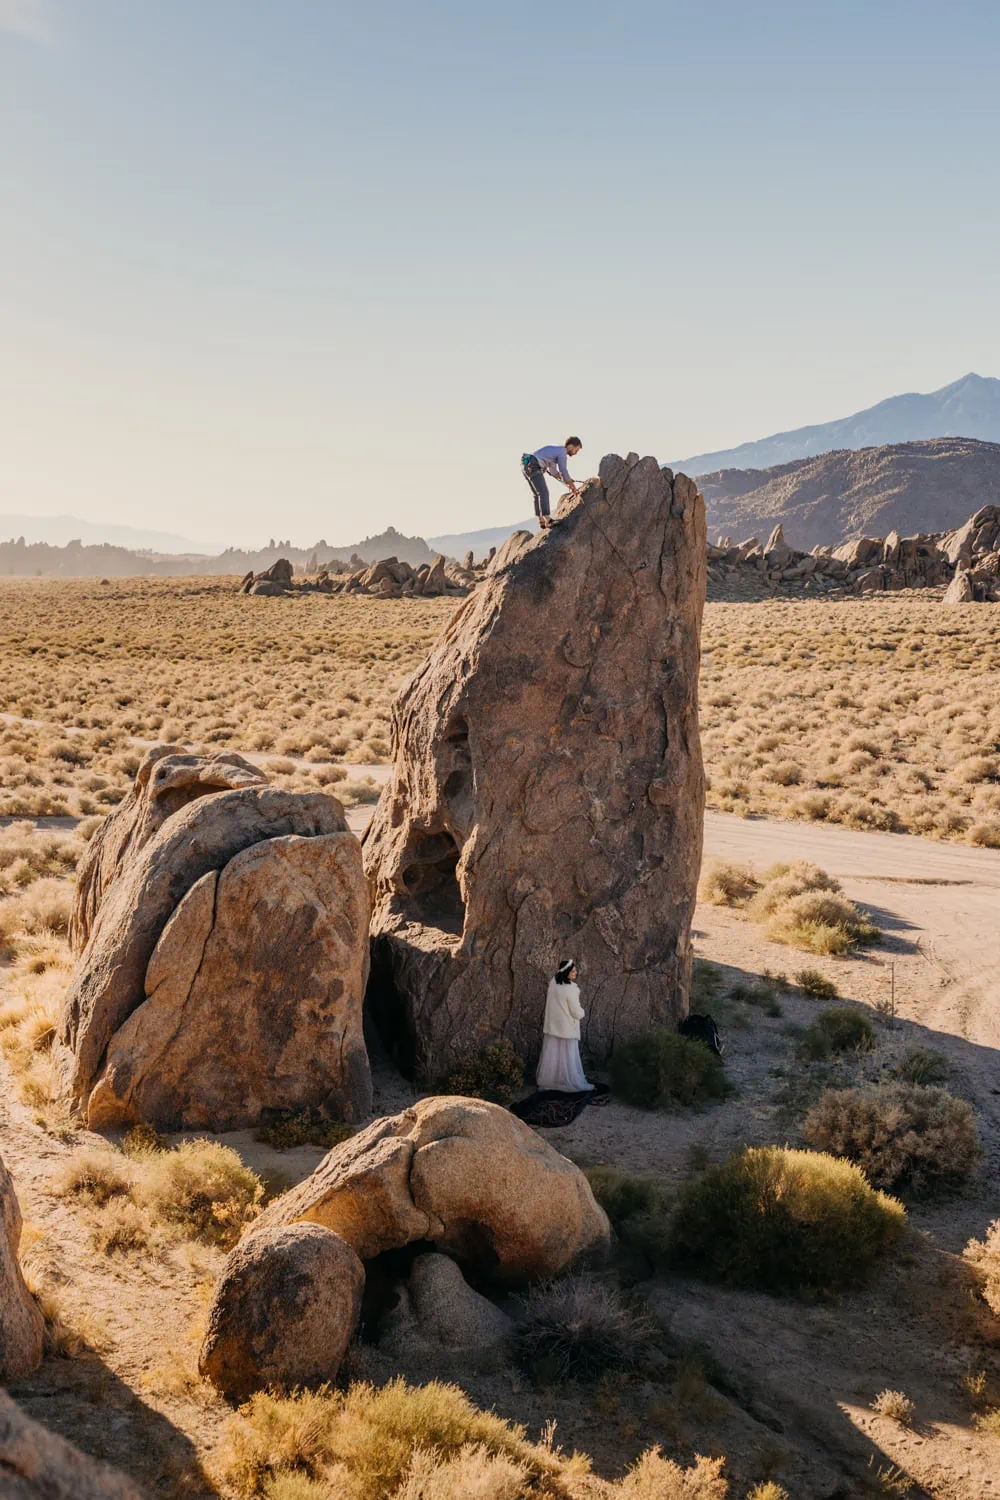 A groom tops out on a climb on a sunny day in Alabama Hills.